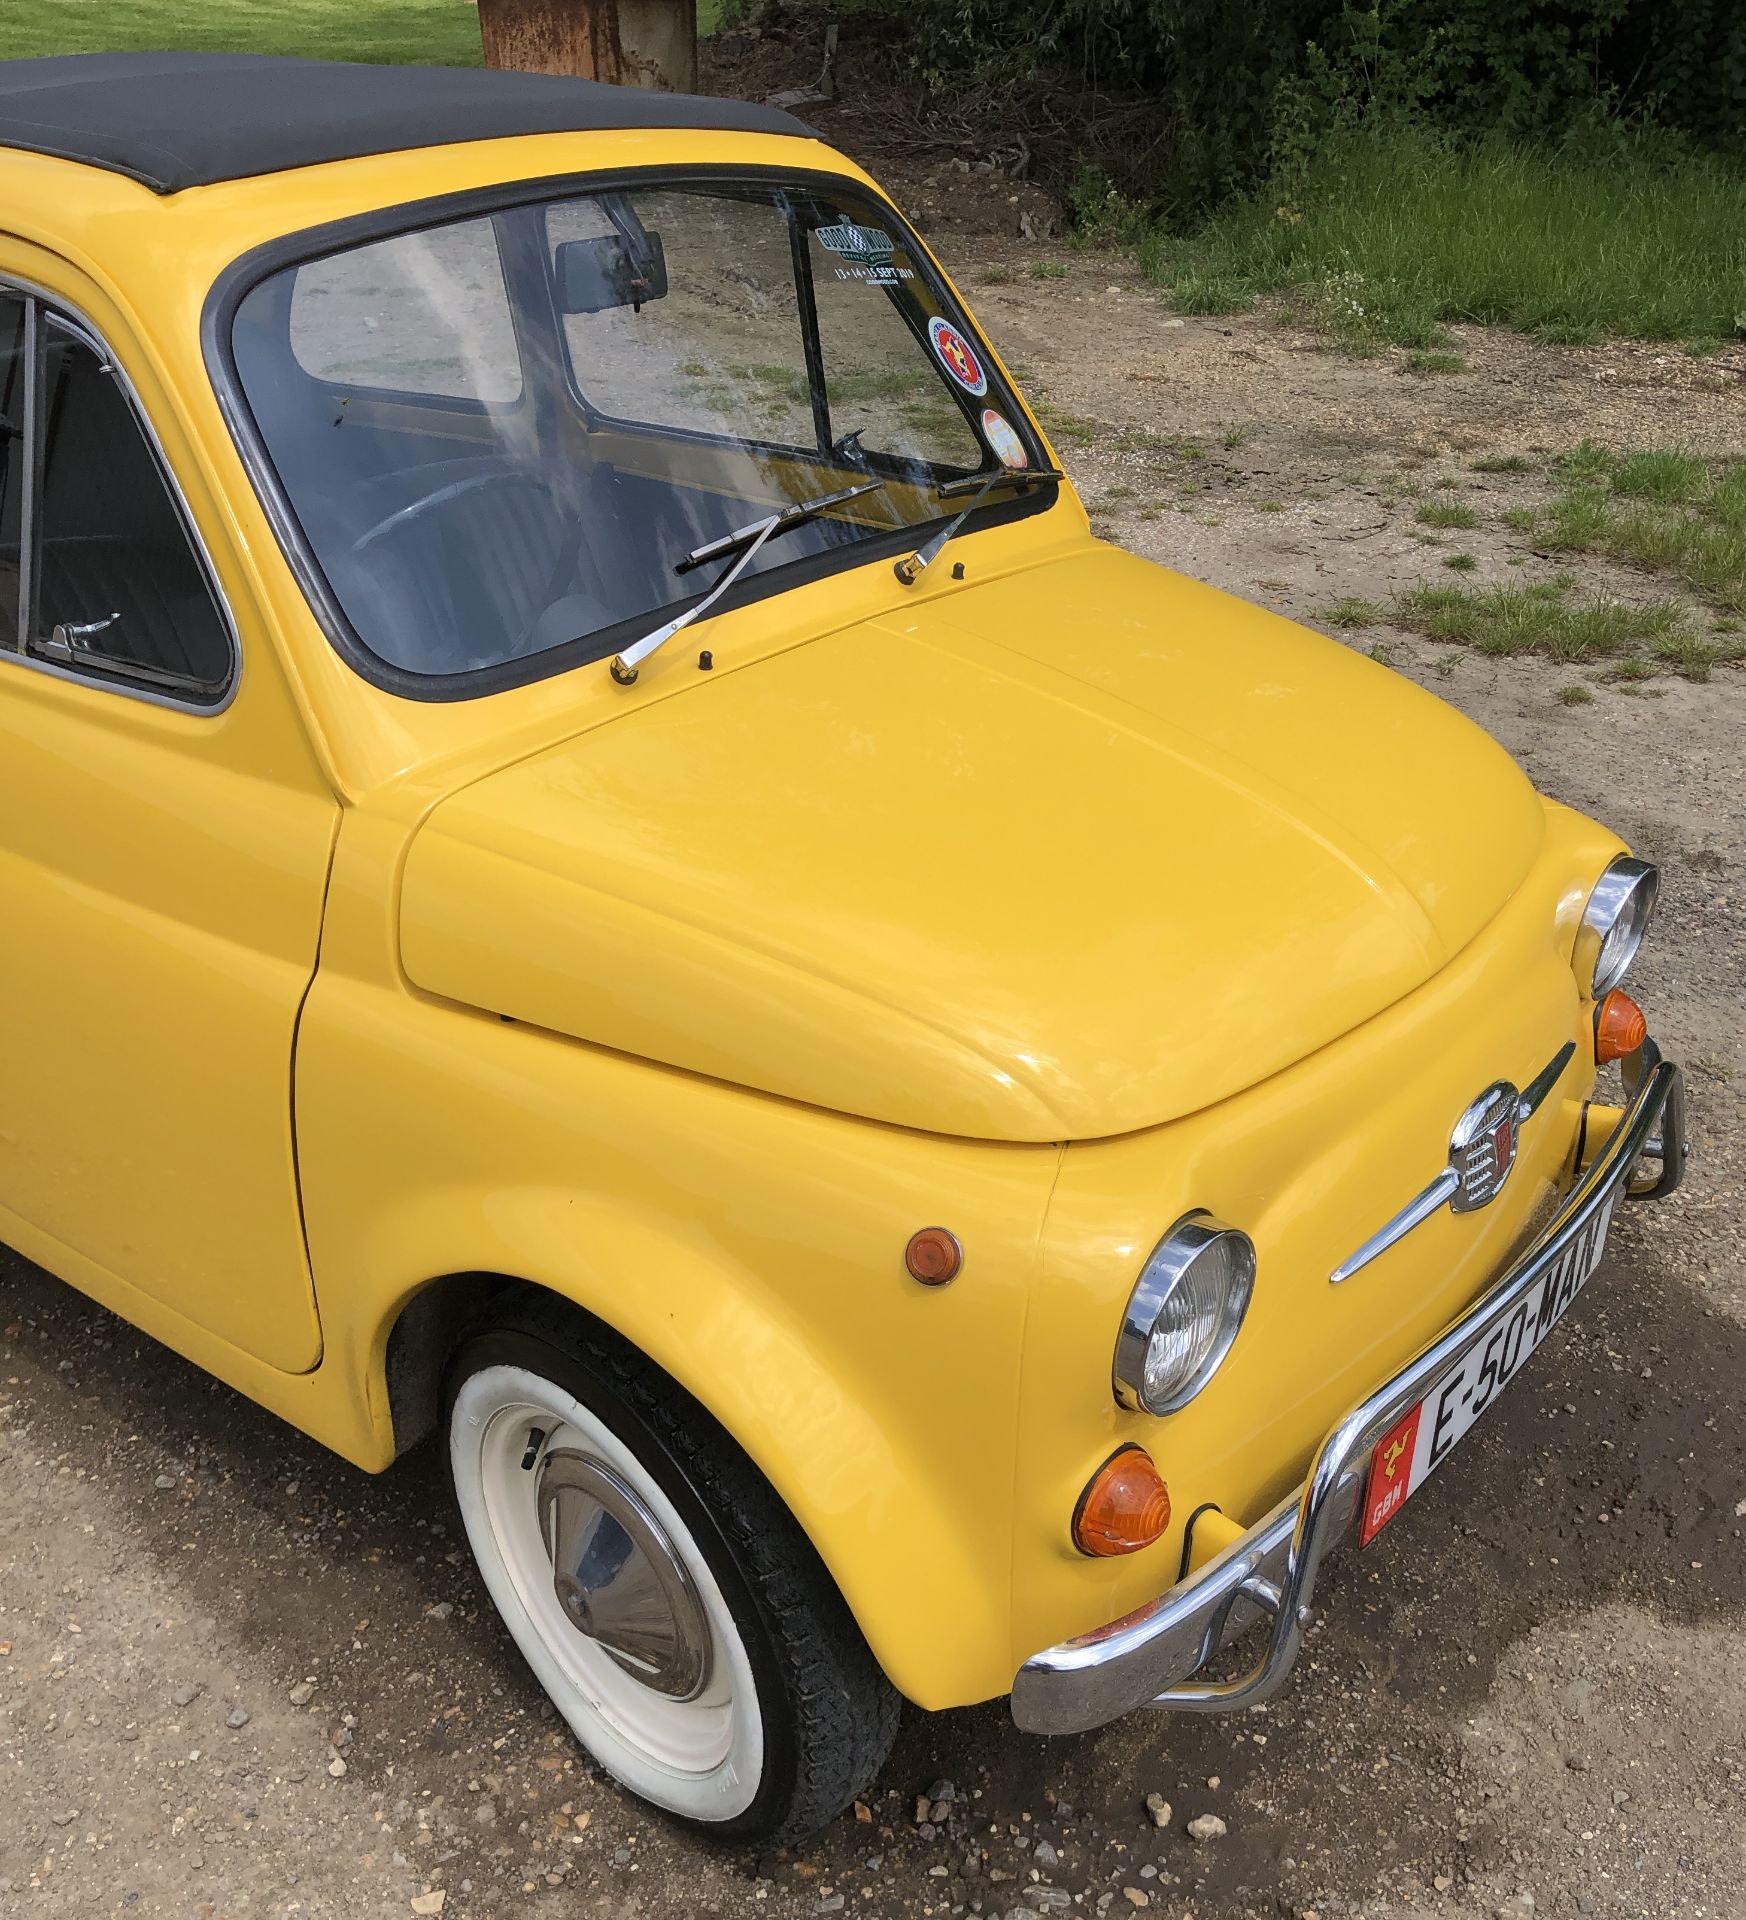 1972 Fiat 500 Saloon, Registration E-50-Man (IOM, Formally Registered as TGF 249L), First Registered - Image 11 of 34